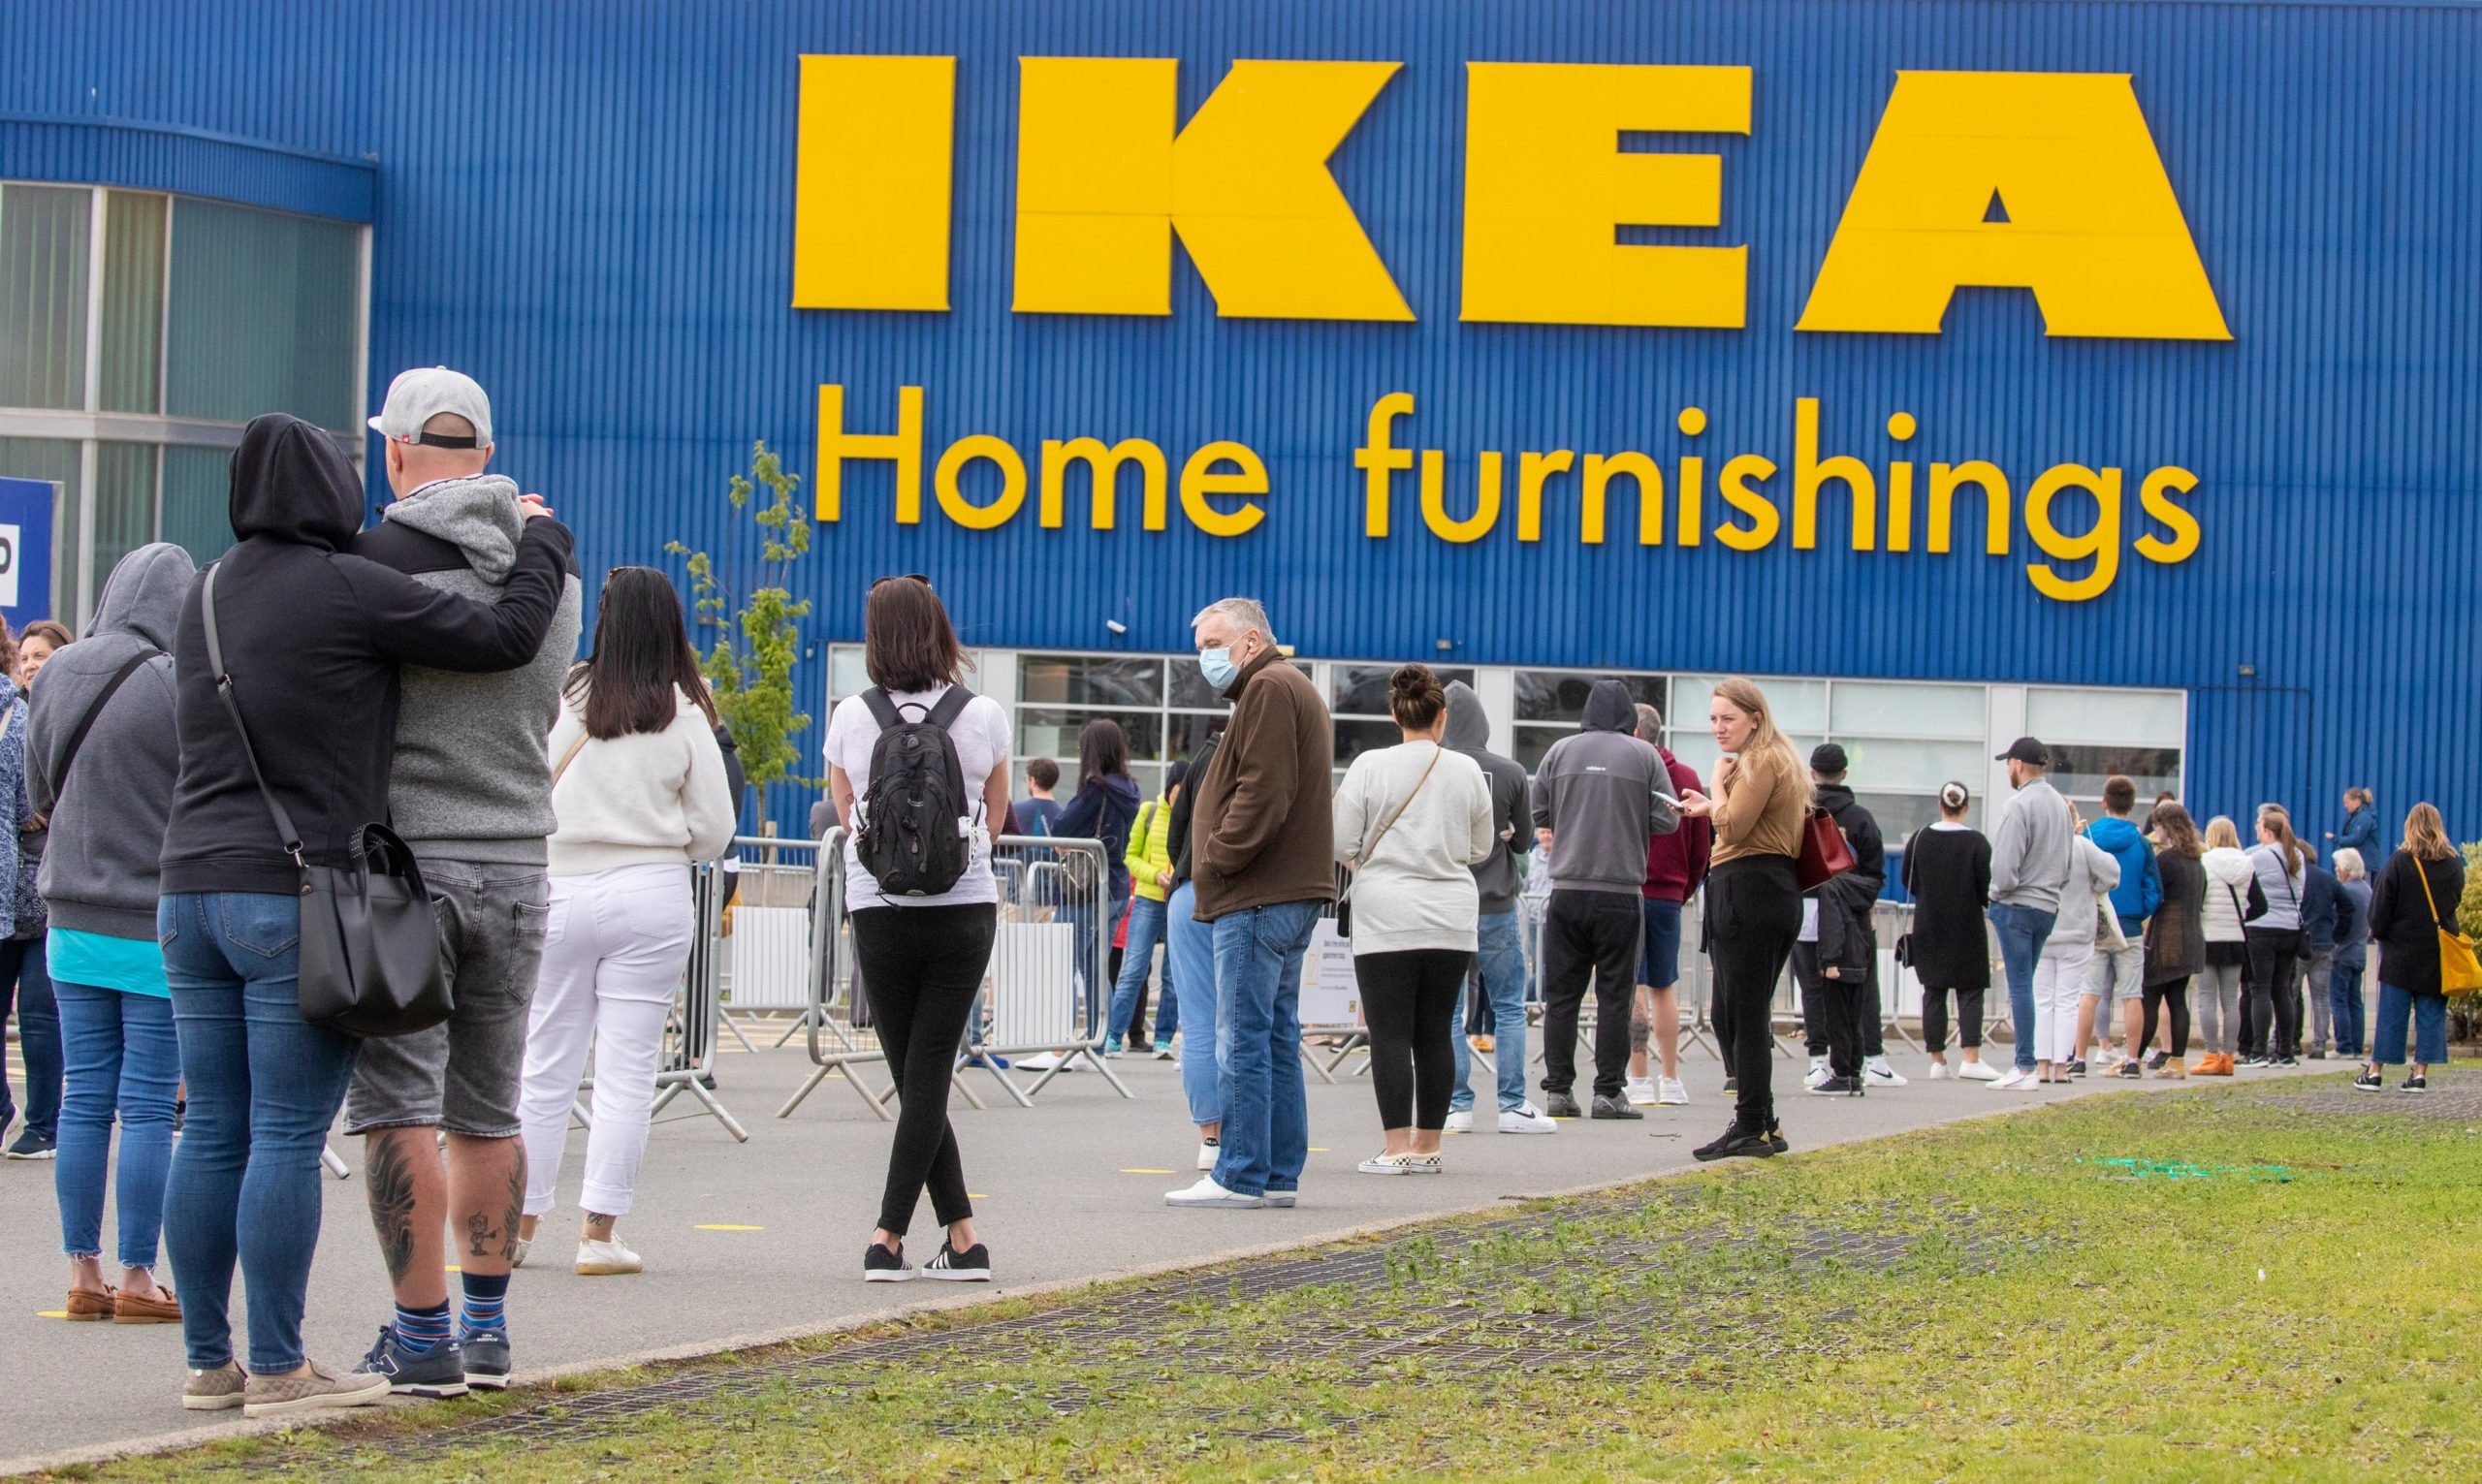 IKEA has reopened in Scotland as the country enters phase two of easing lockdown.